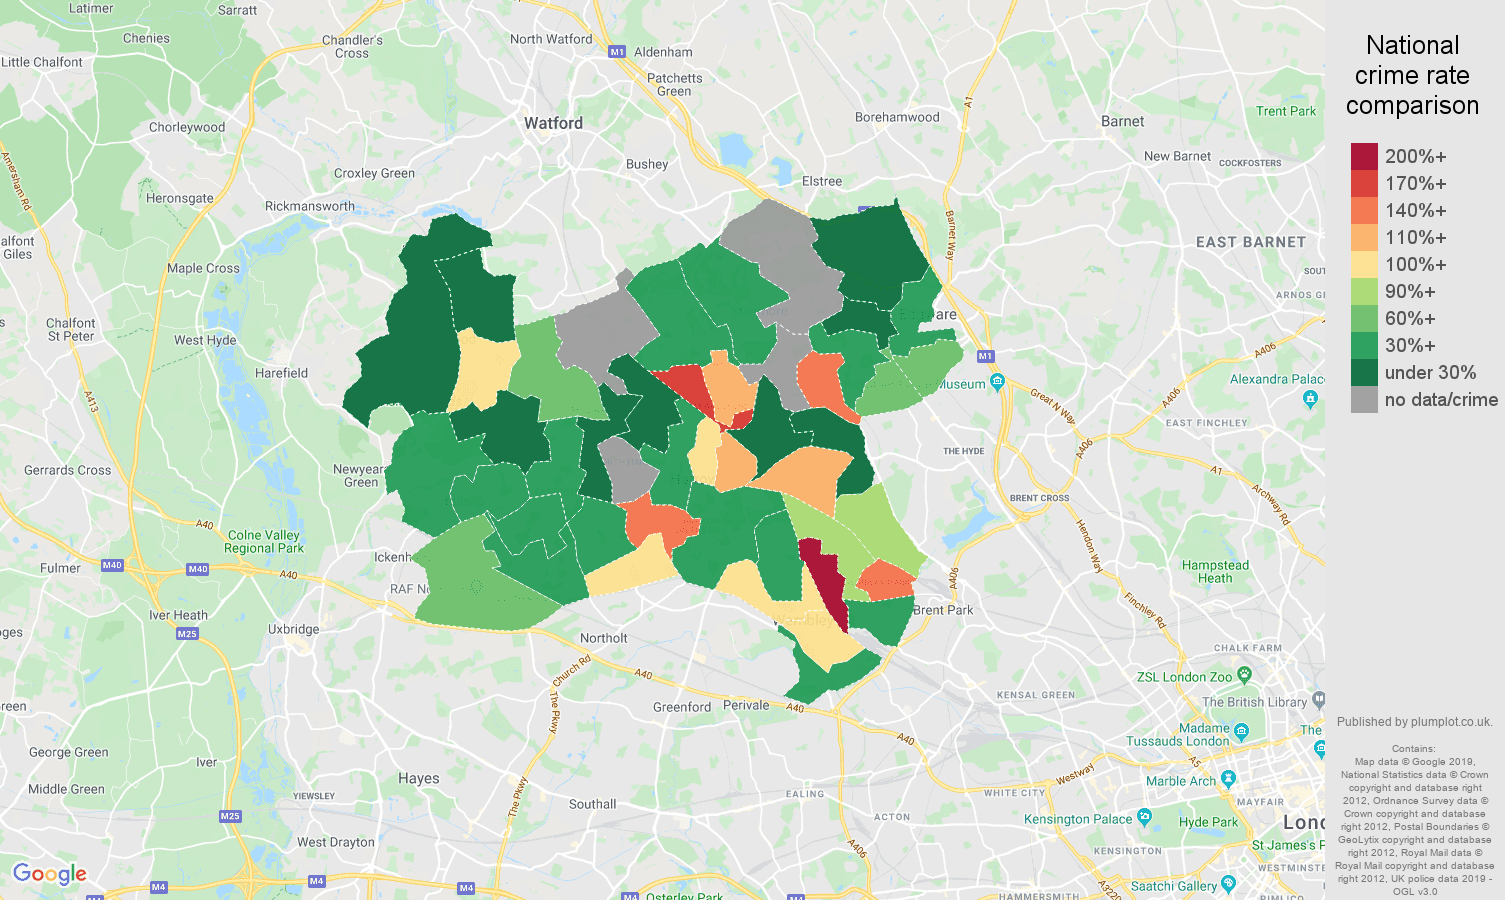 Harrow possession of weapons crime rate comparison map